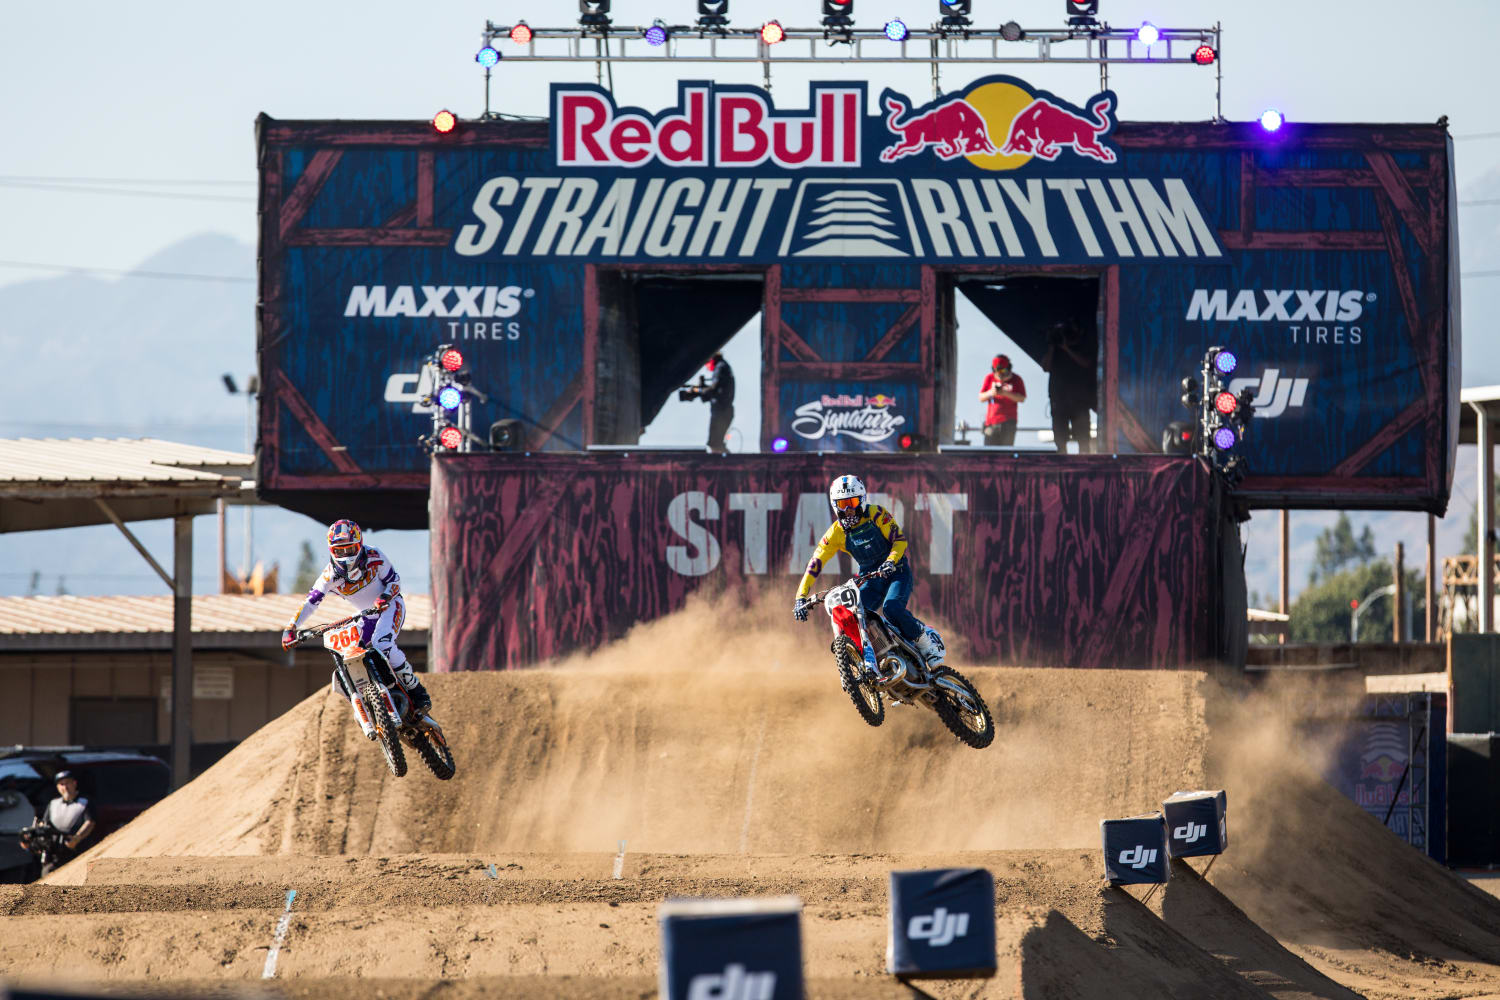 How to Watch Red Bull Straight Rhythm 2022